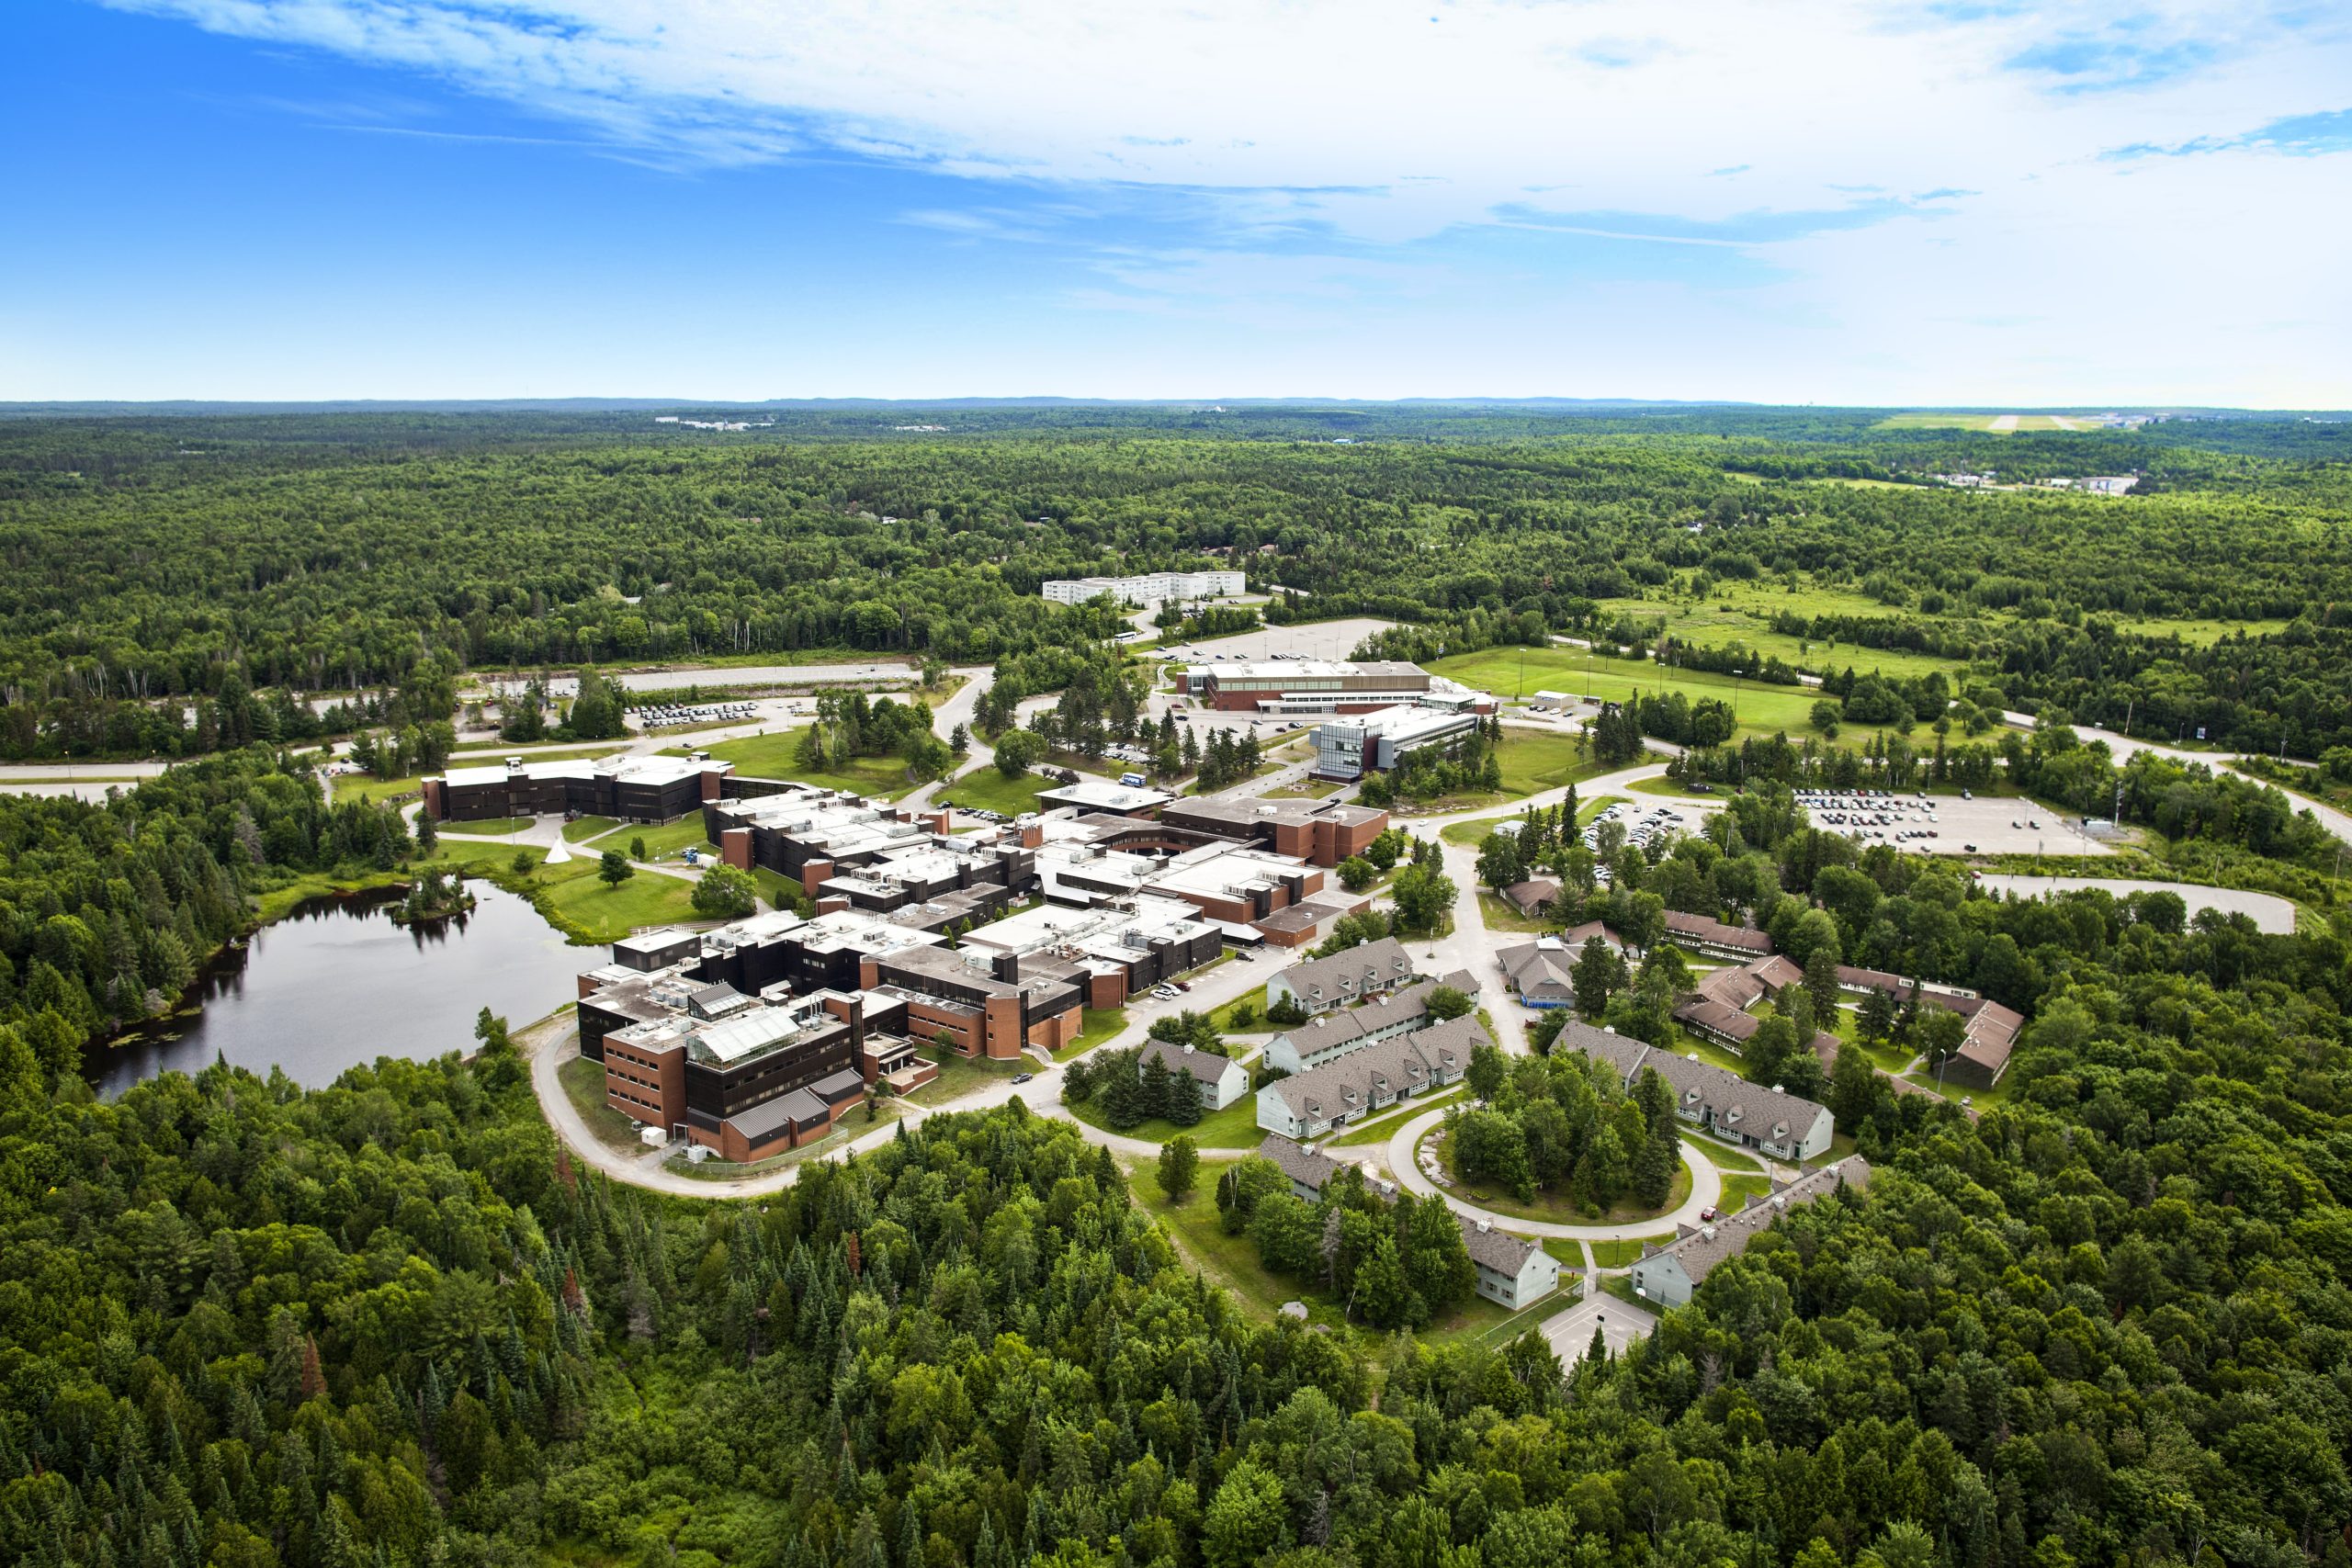 An aerial photograph of Nipissing University's picturesque campus in beautiful North Bay